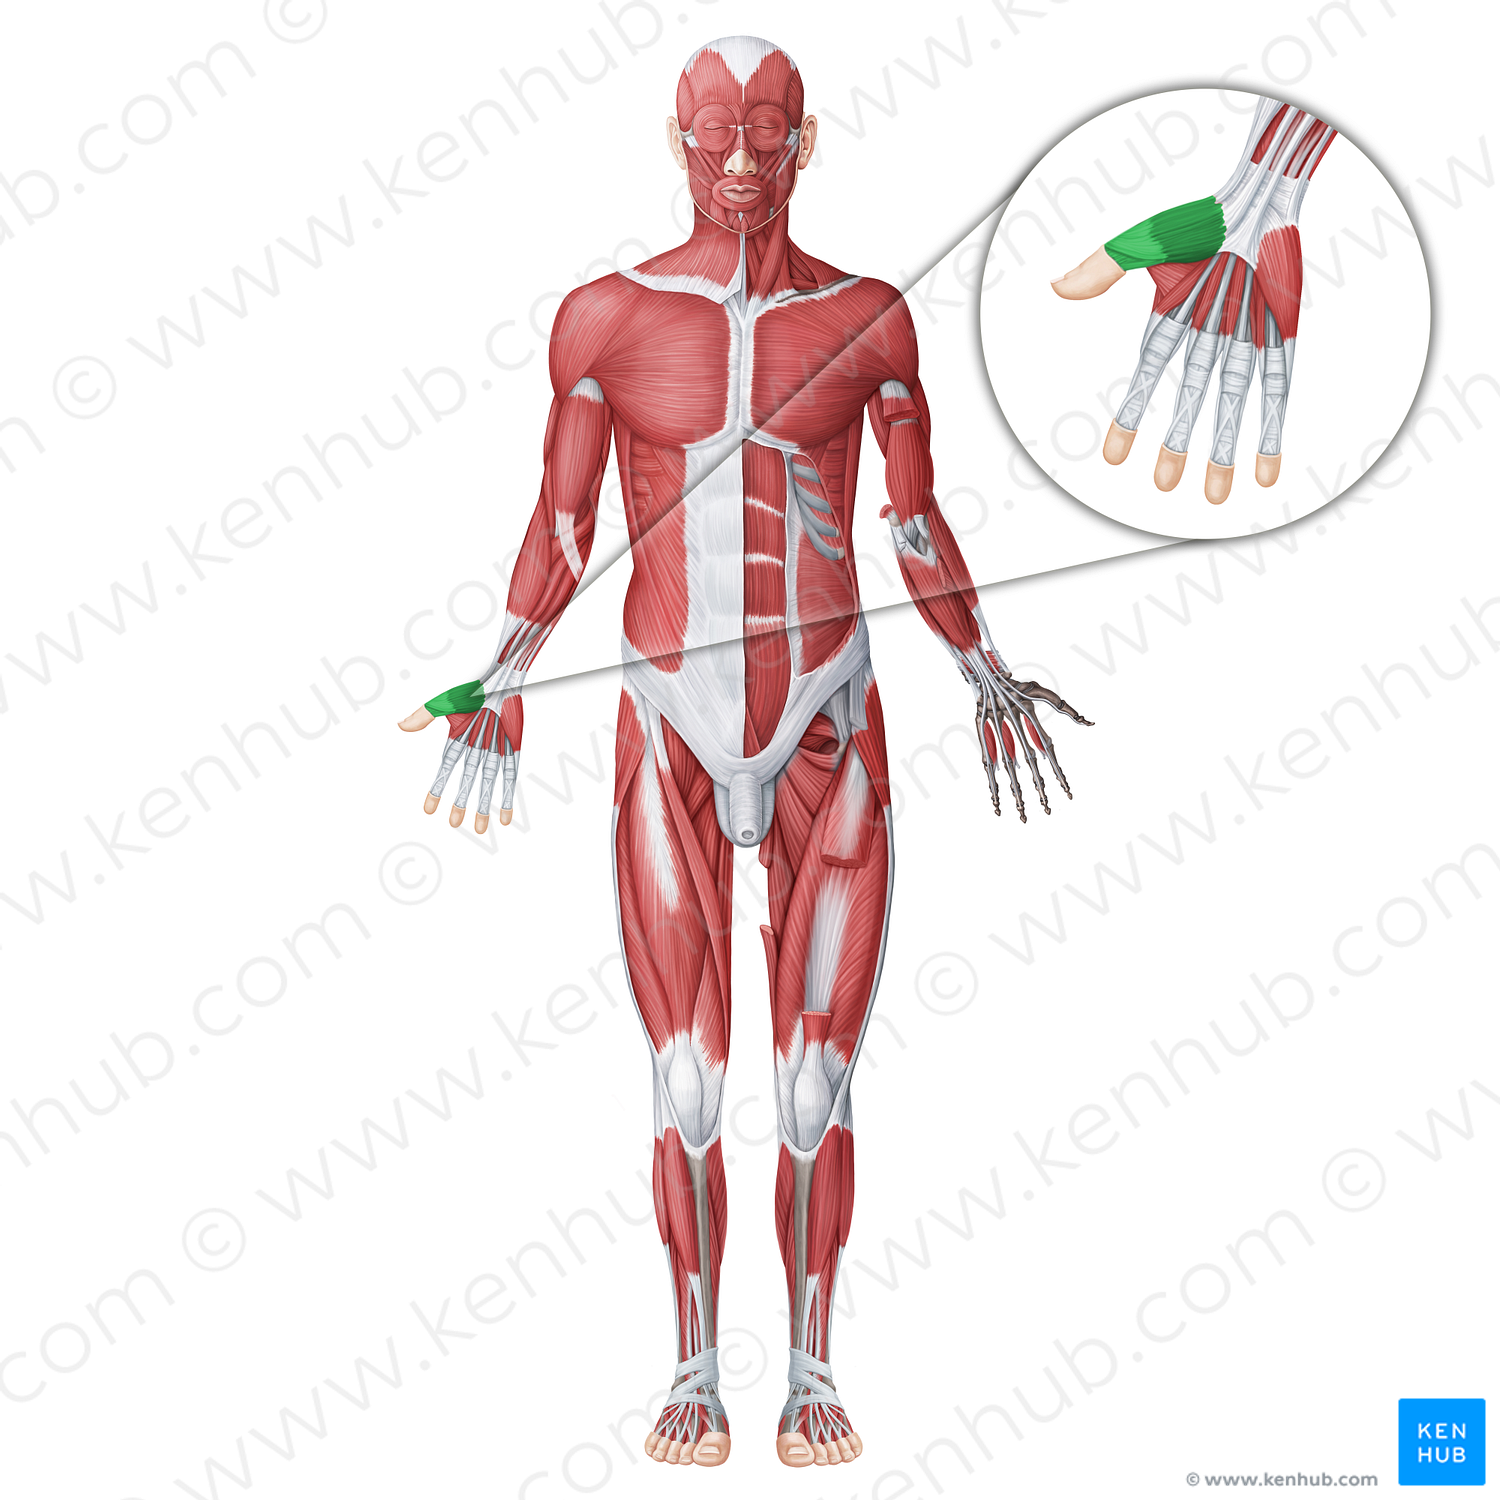 Thenar muscles (#18774)